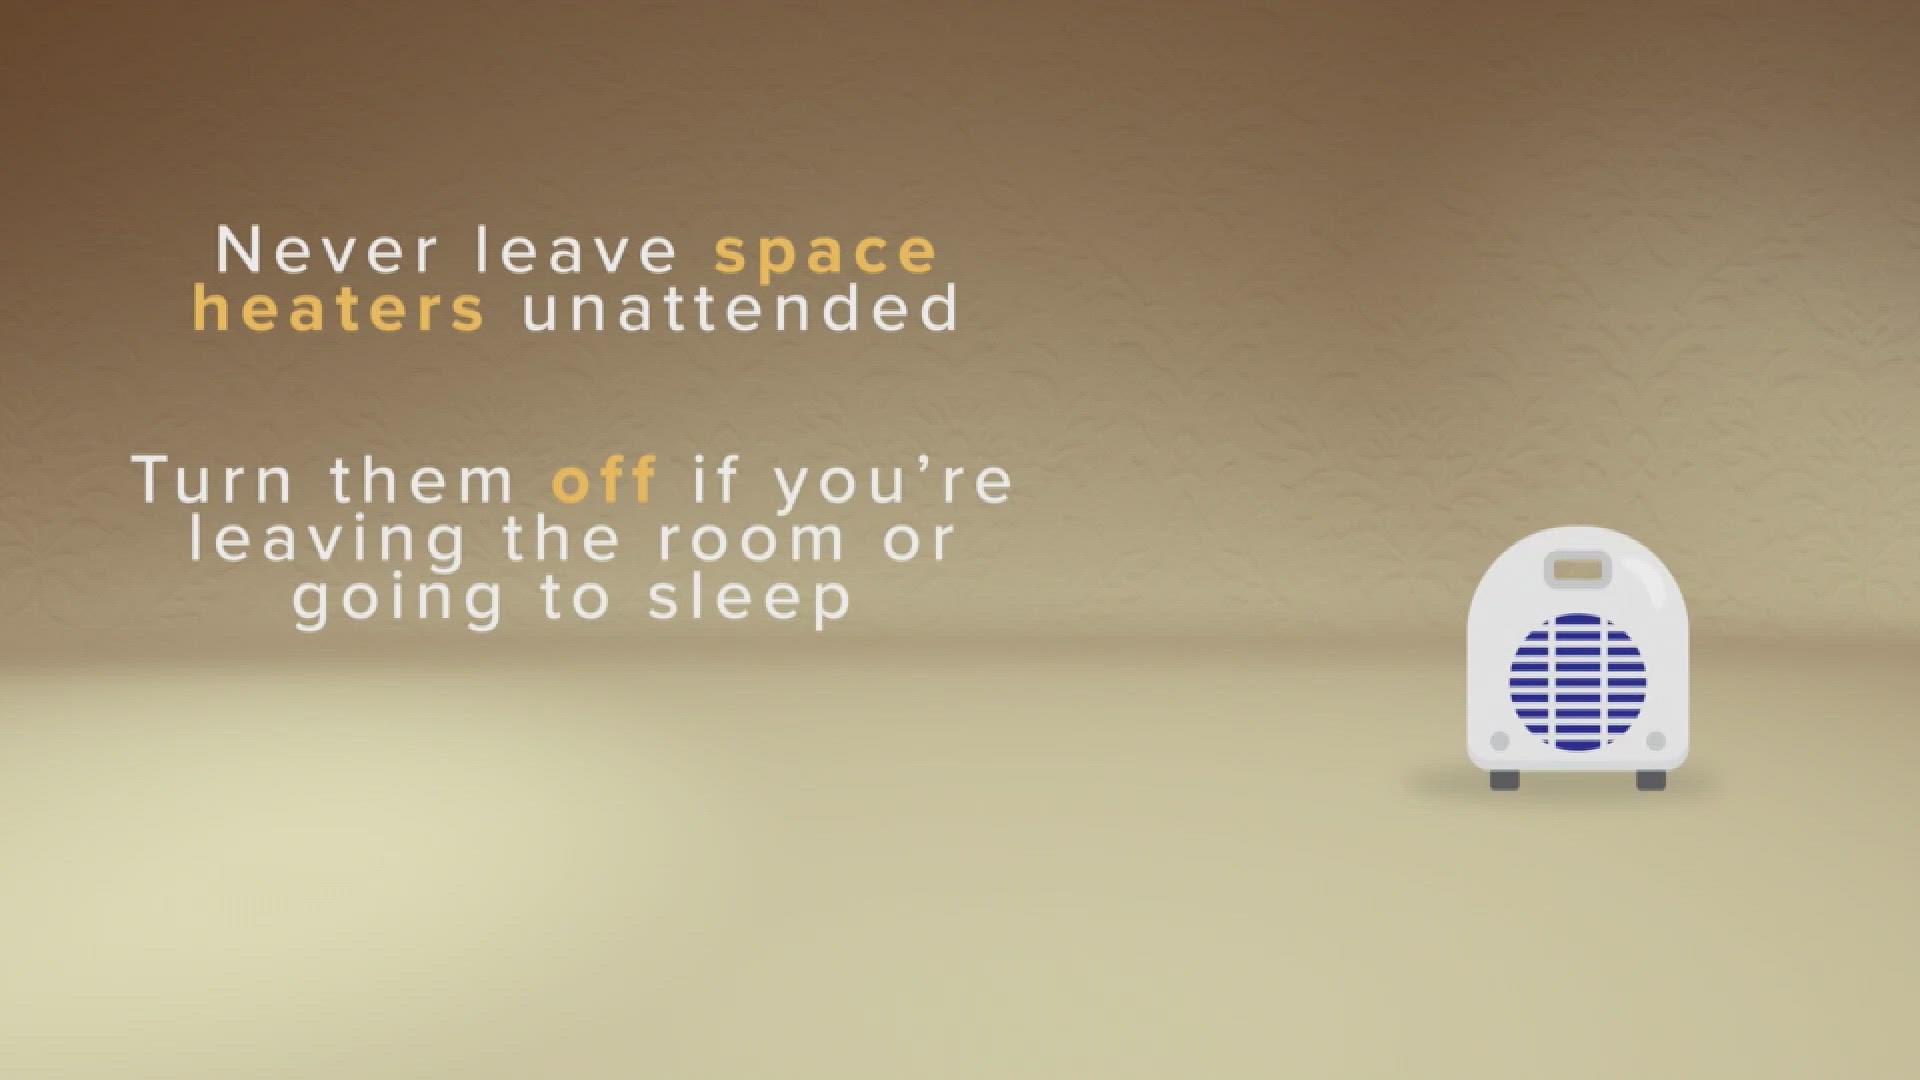 Never leave space heaters unattended, turn them off if leaving the room or going to sleep and keep them at least three feet away from anything that's flammable.